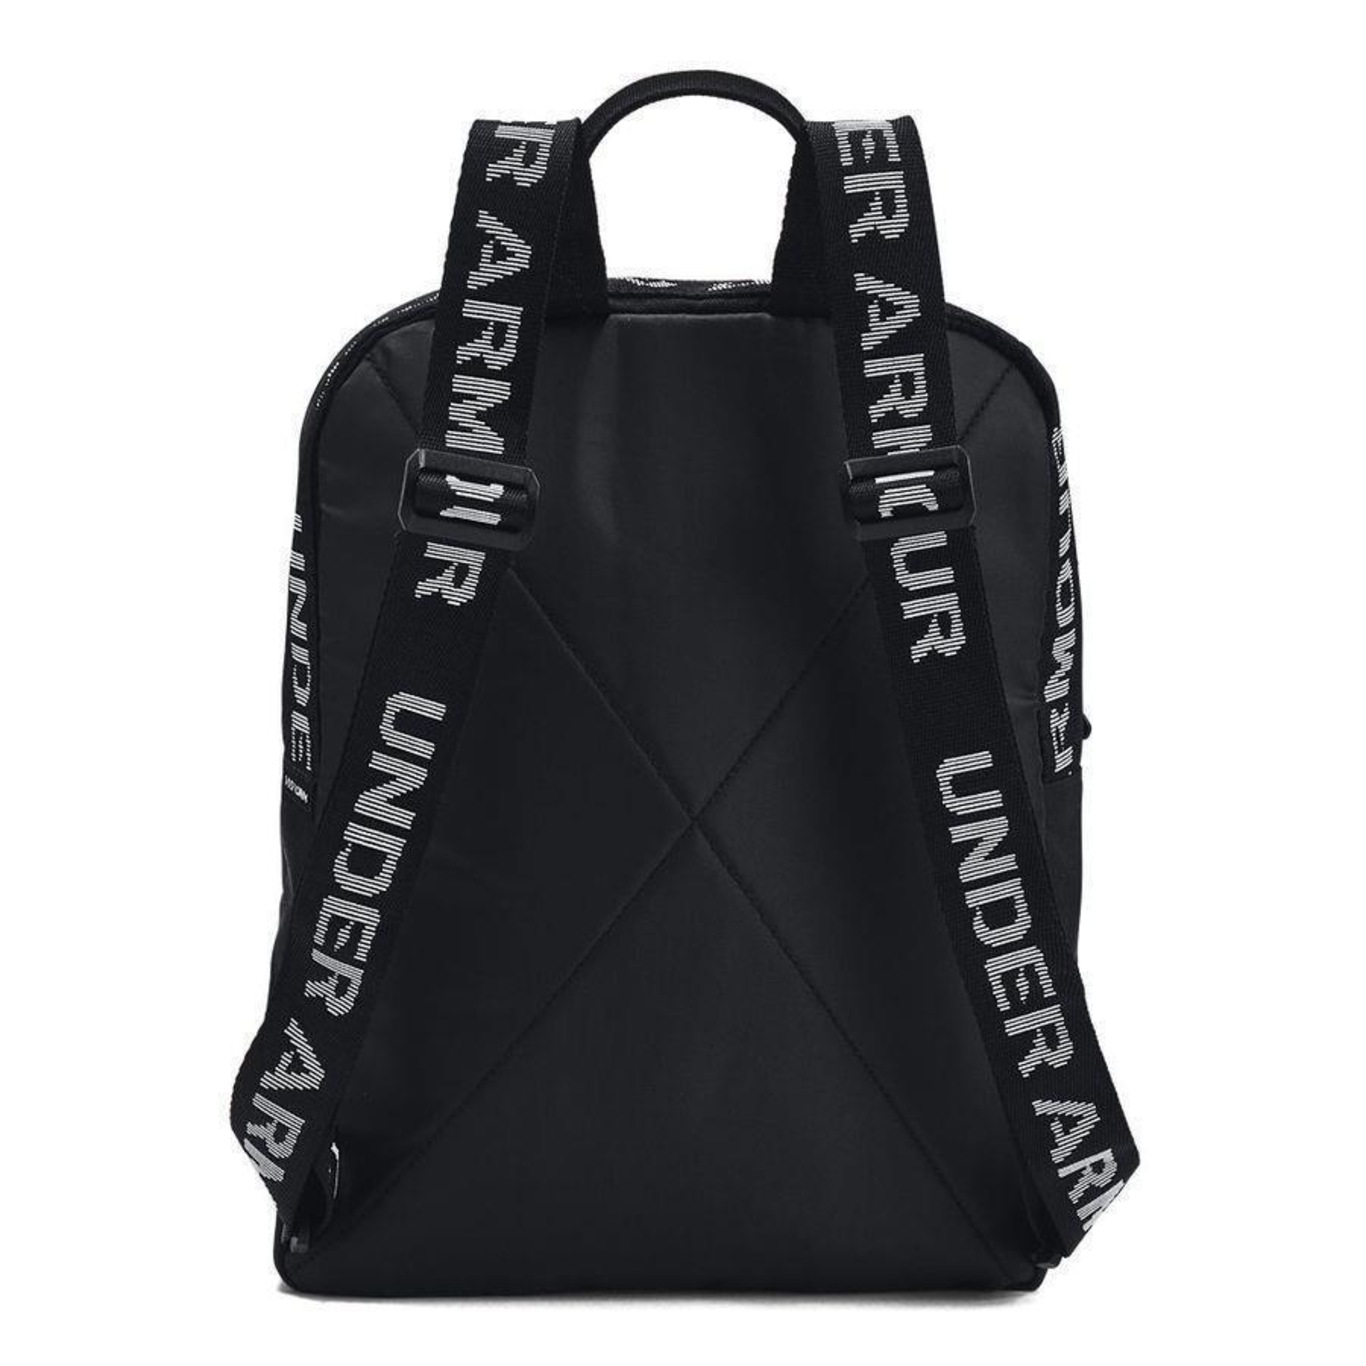 Under Armour Drawstring Tote Bags for Women